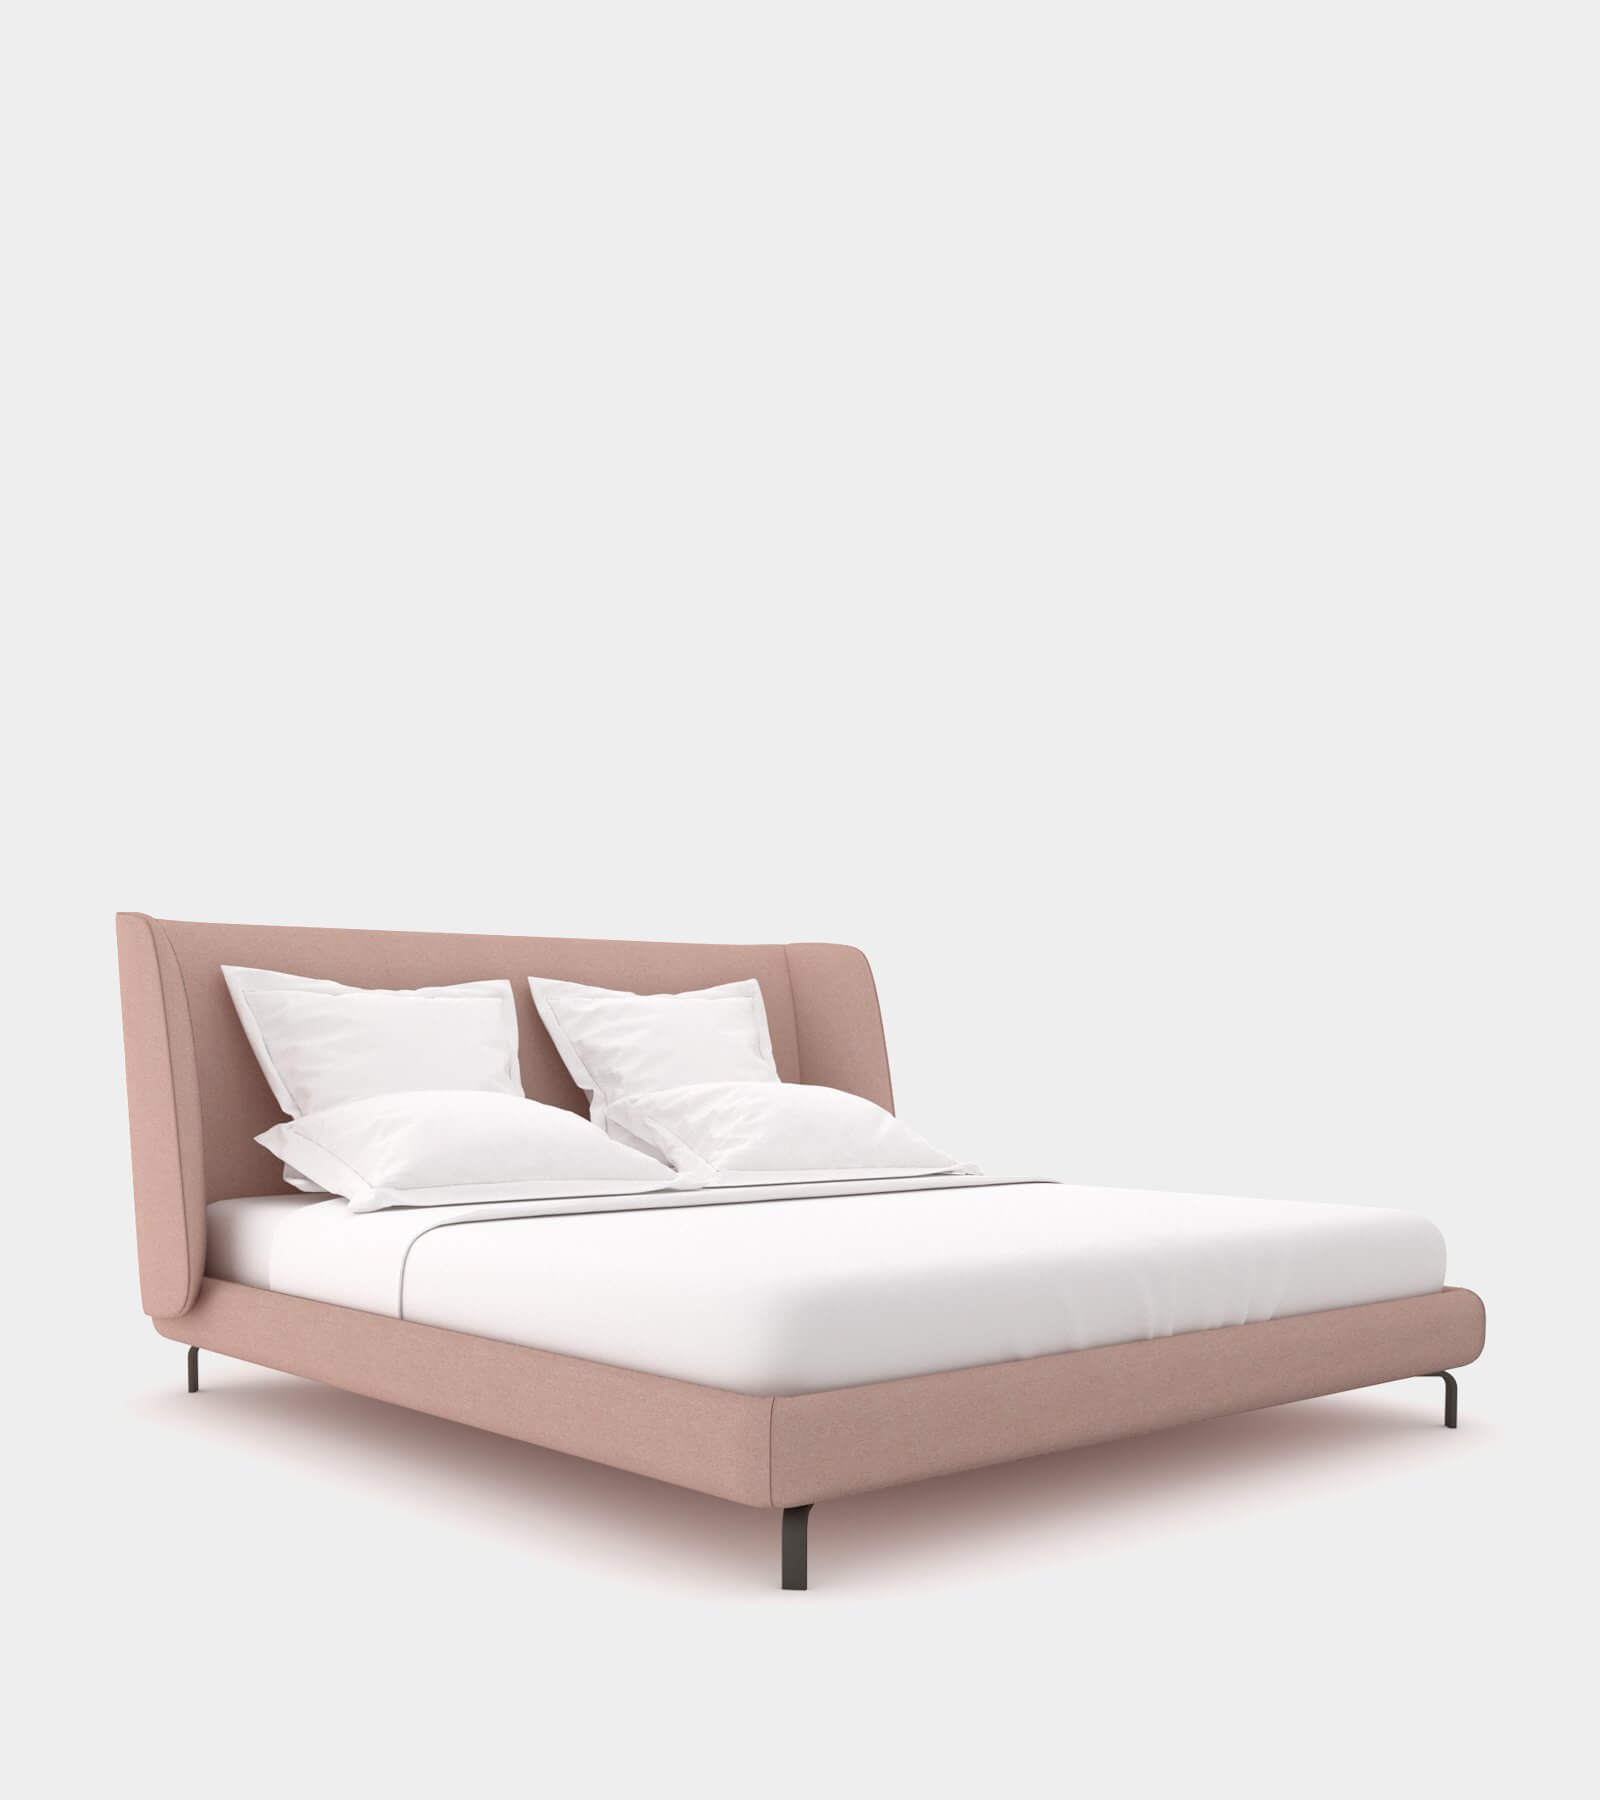 Bed with round headboard 2 - 3D Model